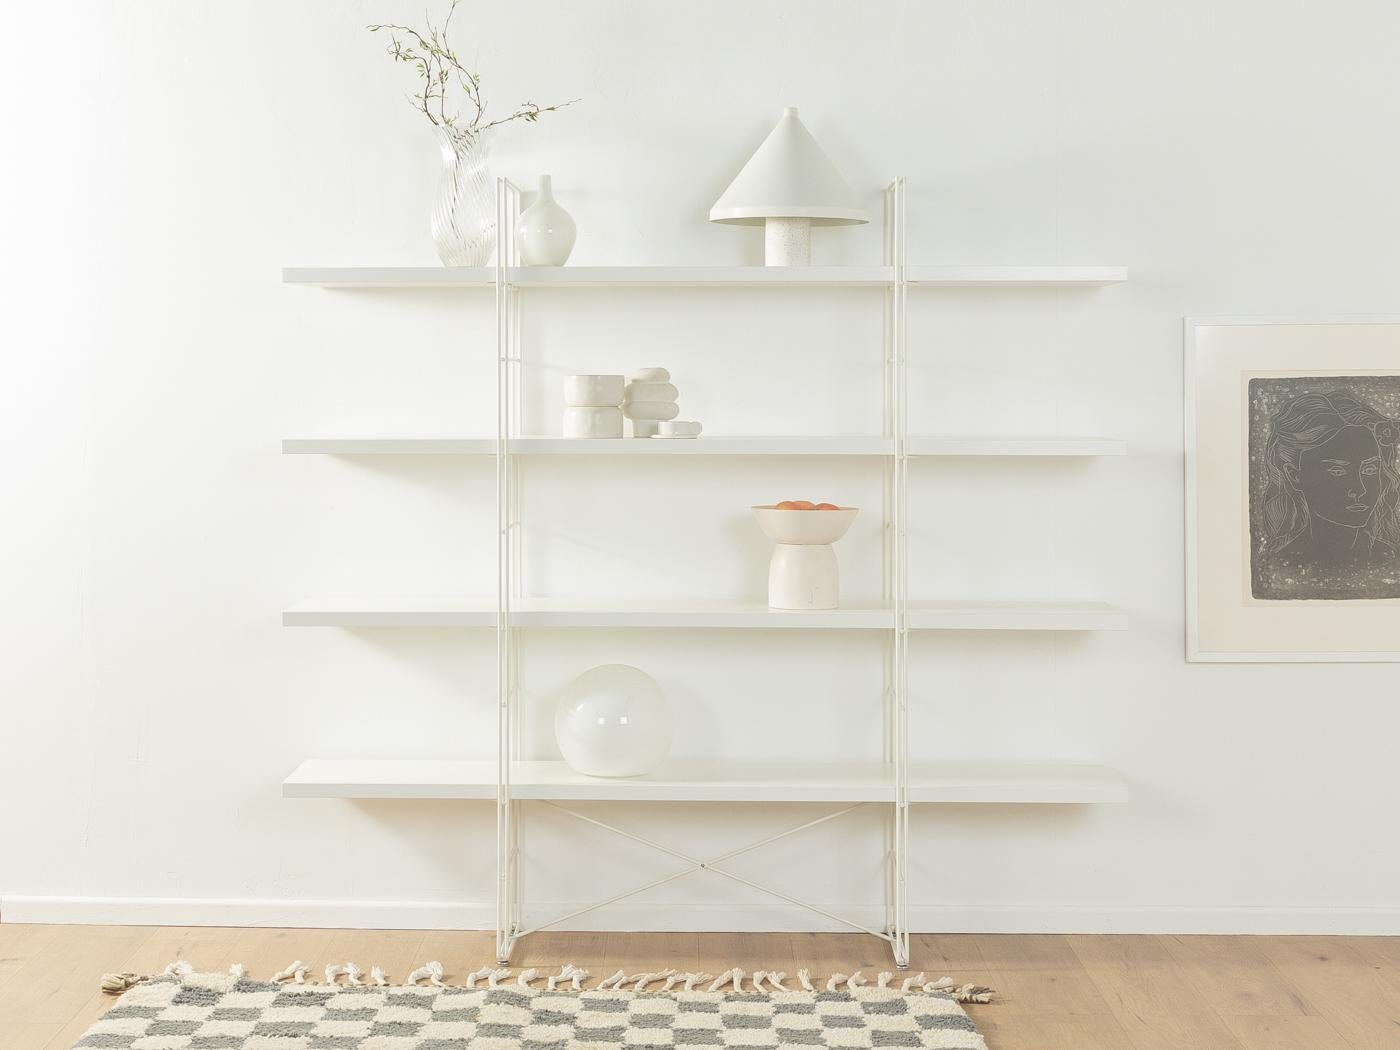 helving system ENETRI by Niels Gammelgaard for IKEA from the 2000s. New edition of the GUIDE system from 1985. Powder-coated metal frame in white with four chipboard shelves in white.
Quality Features:

    good workmanship
    high quality